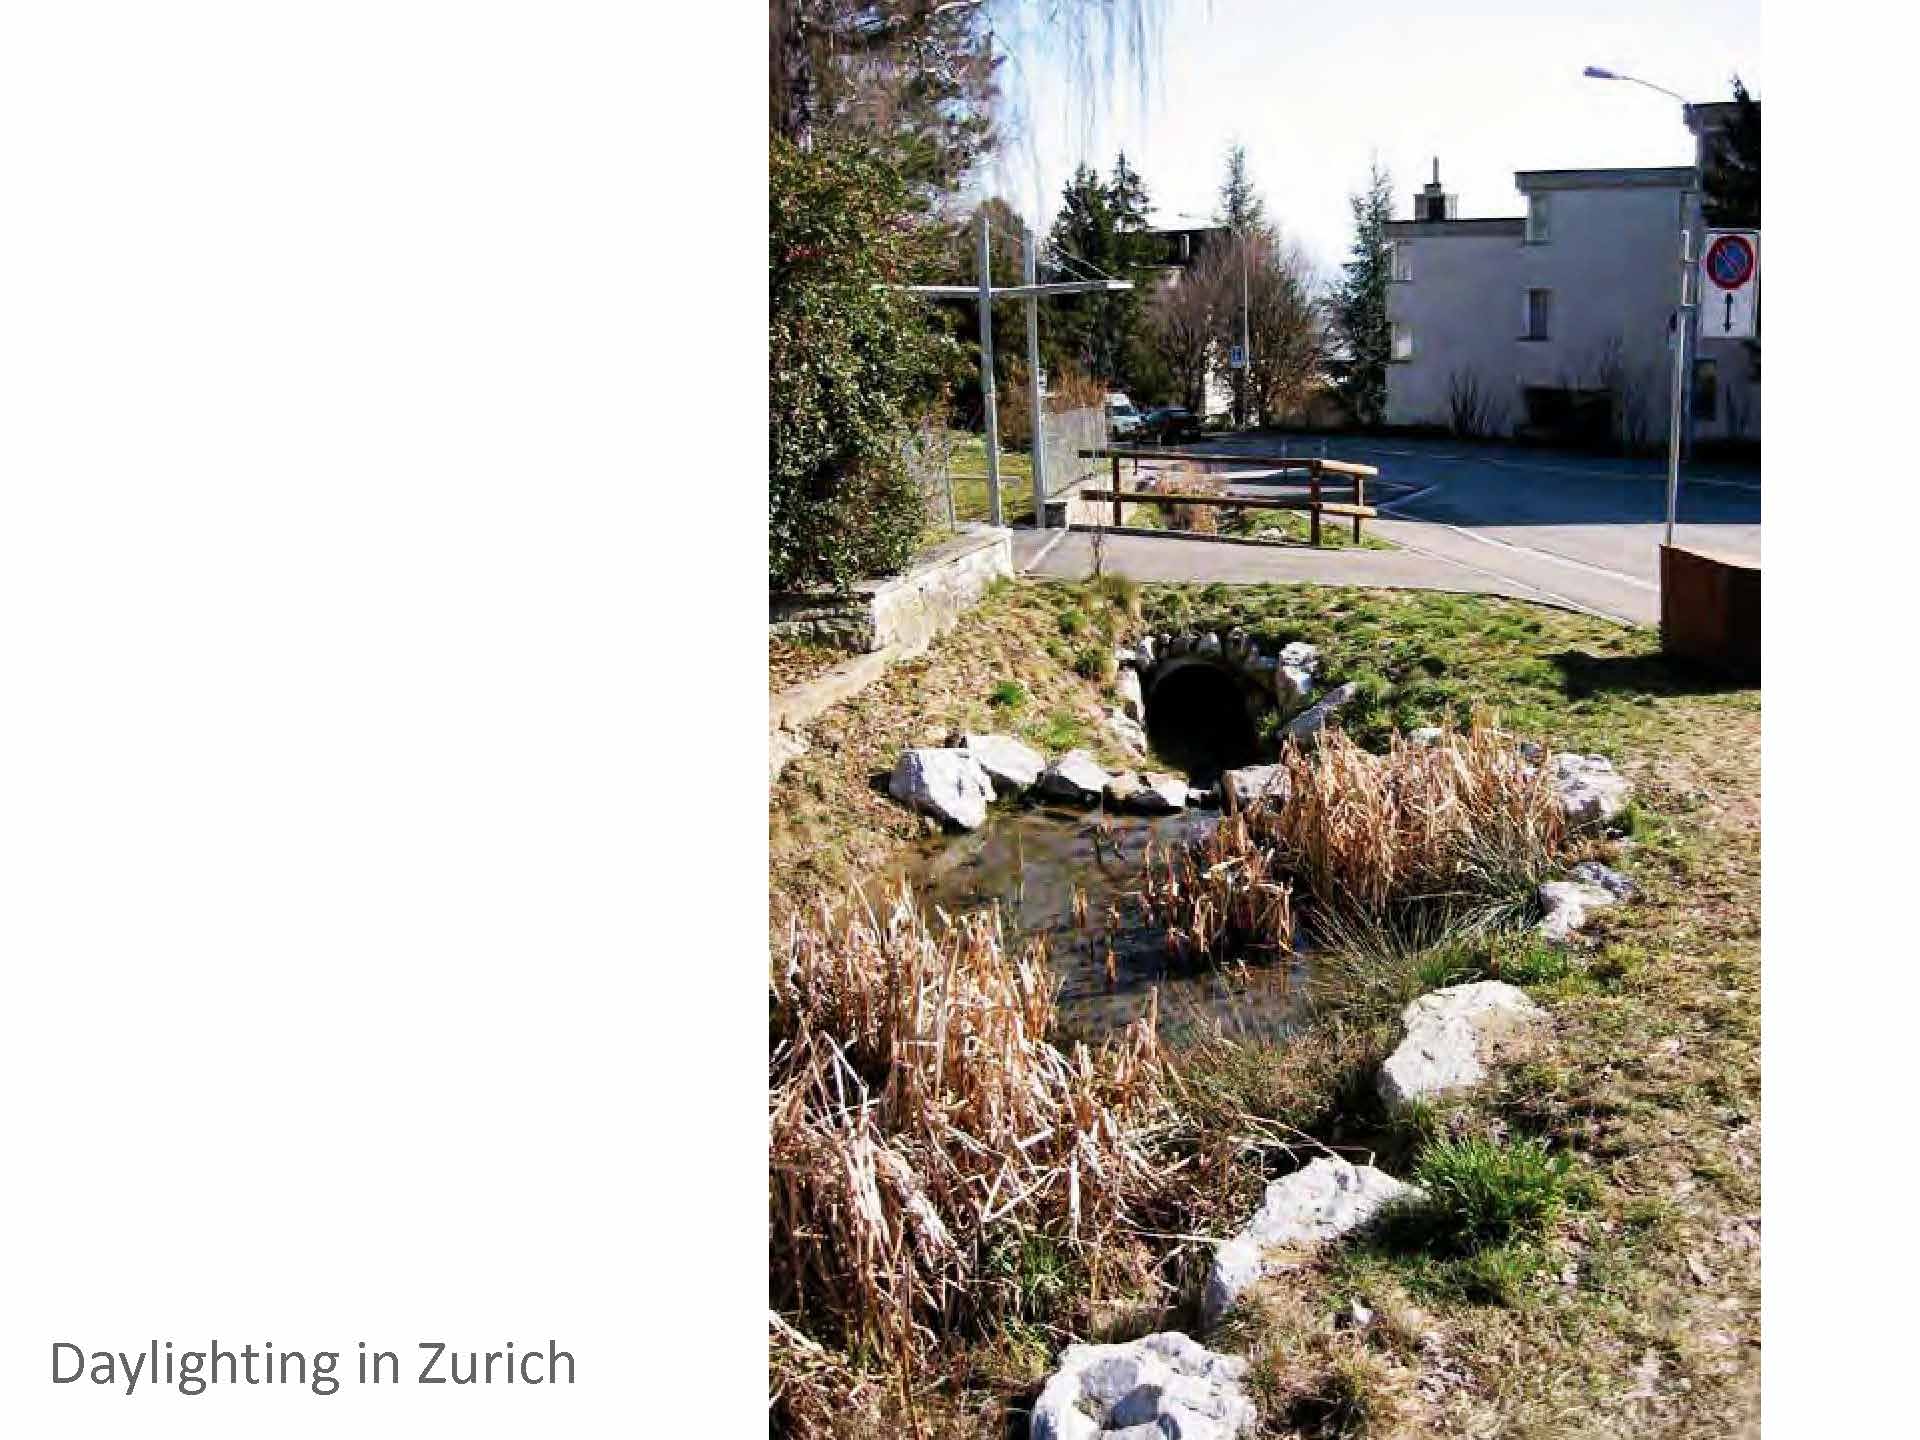  Zurich's constructed streams are designed to carry 3 to 5x the dry weather flow, with the excess going into the sewer.&nbsp; 